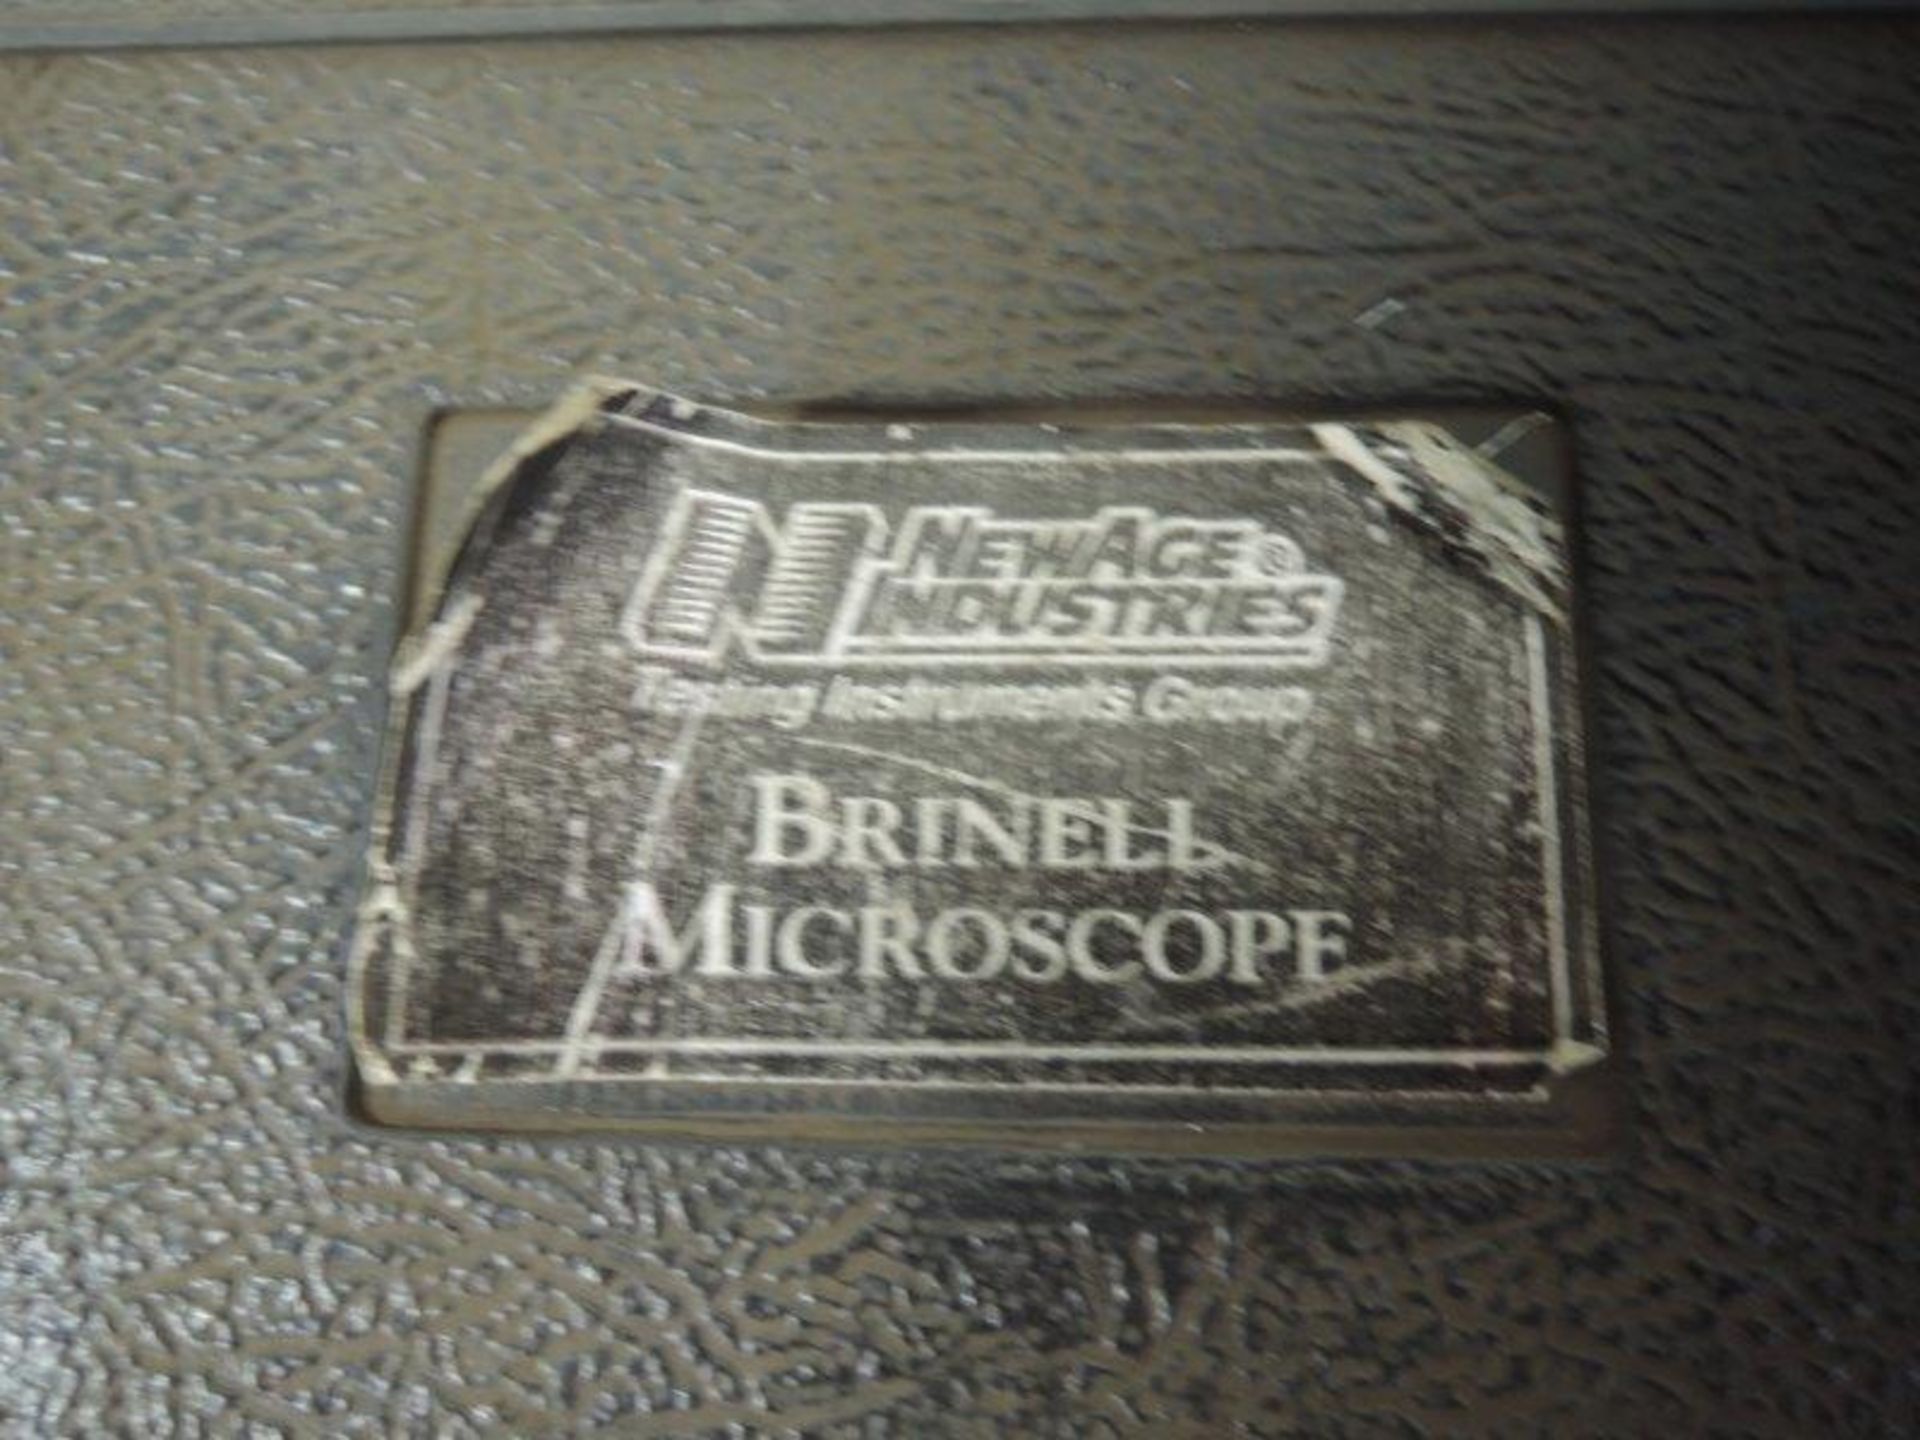 NEW AGE INDUSTRIES MODEL 35-450 BRINELL MICROSOPE [WALTON HILLS, OH] - Image 2 of 2